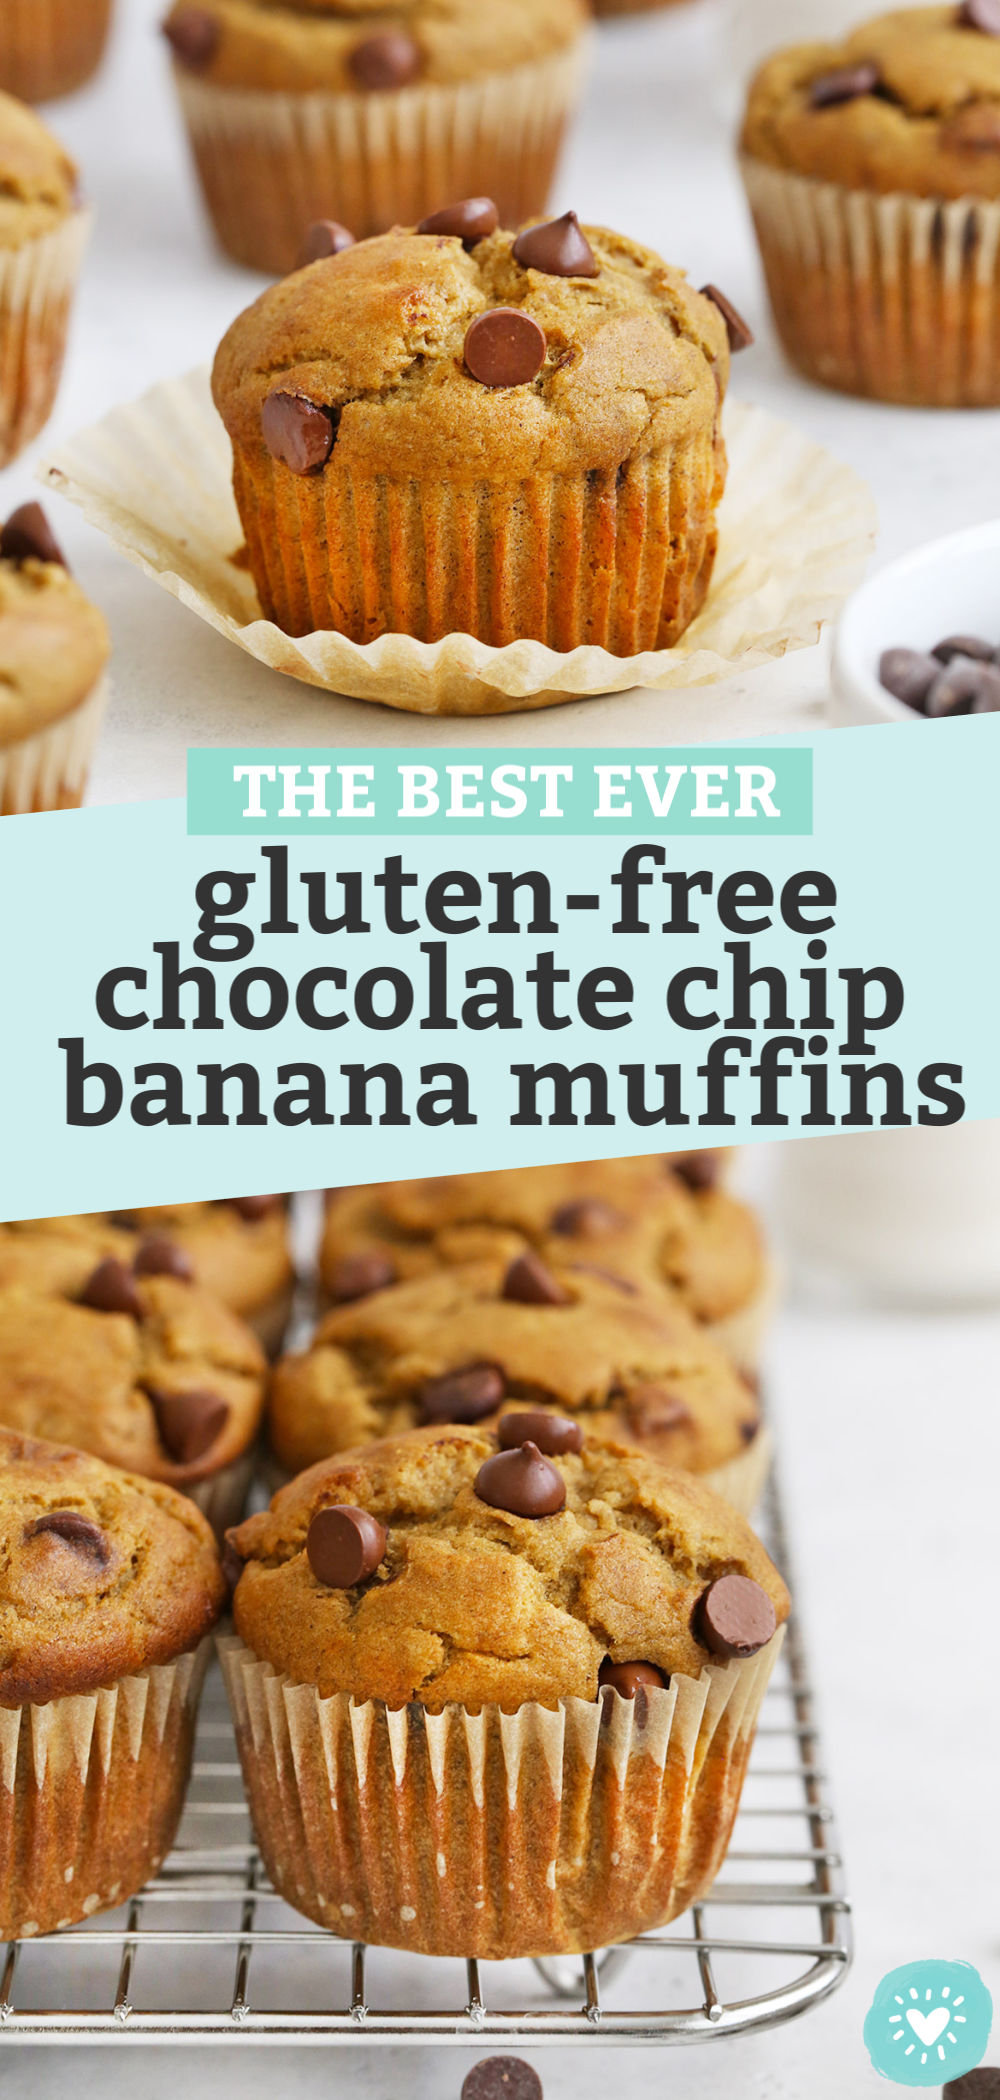 Collage of images of Gluten-Free Chocolate Chip Banana Muffins with text overlay that reads "The Best Ever Gluten-Free Chocolate Chip Banana Muffins"